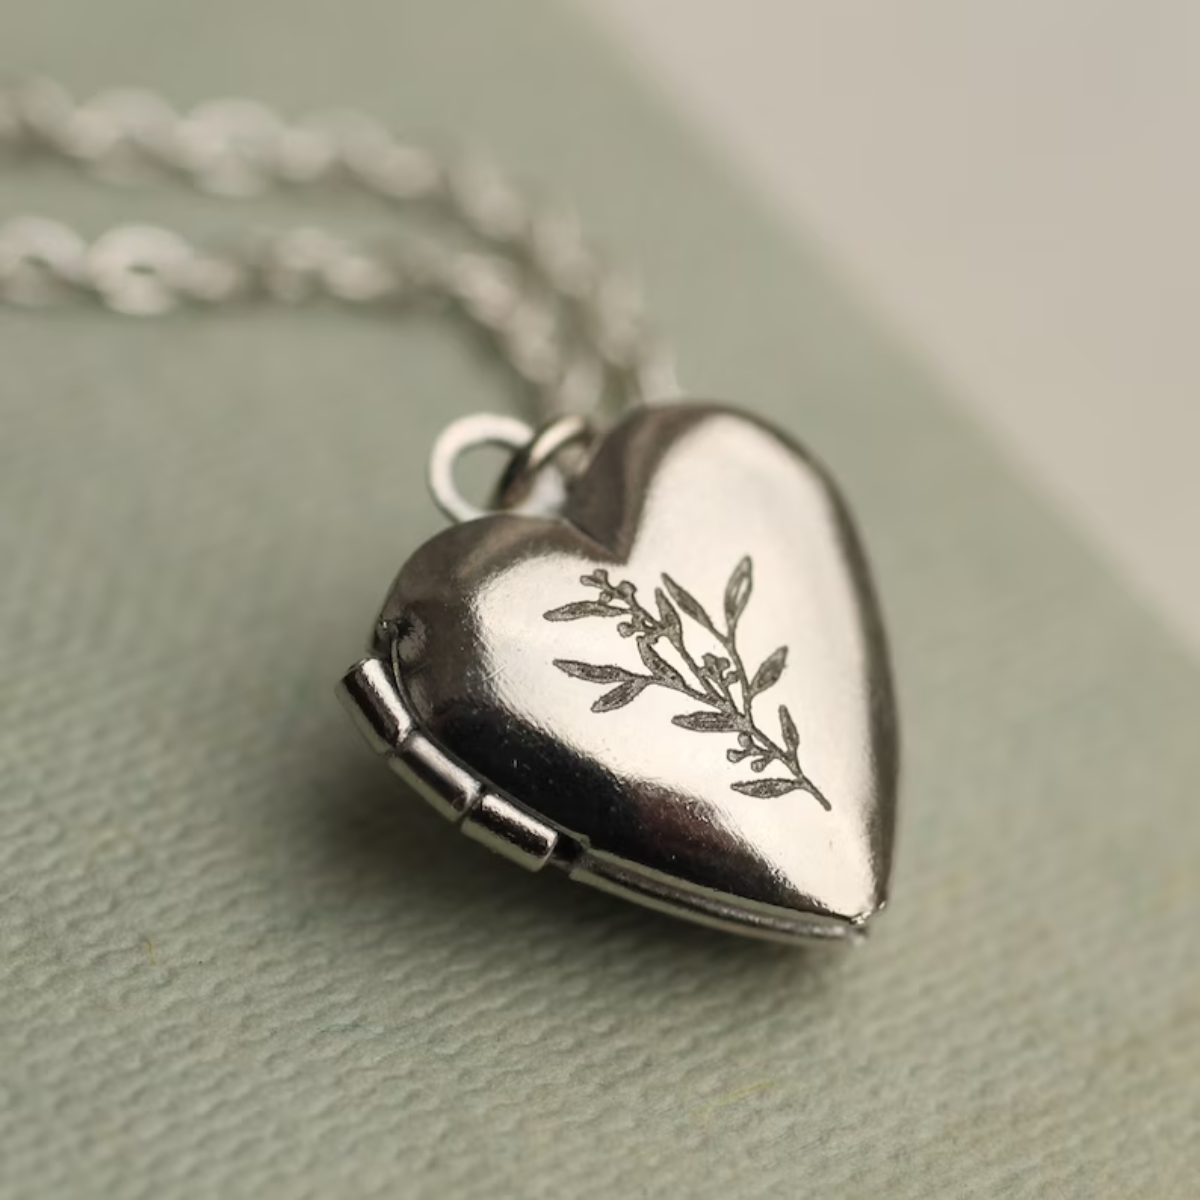 22. Forever Sealed: Engraved Love Locket, the Perfect 7th Anniversary Gift for Your Wife